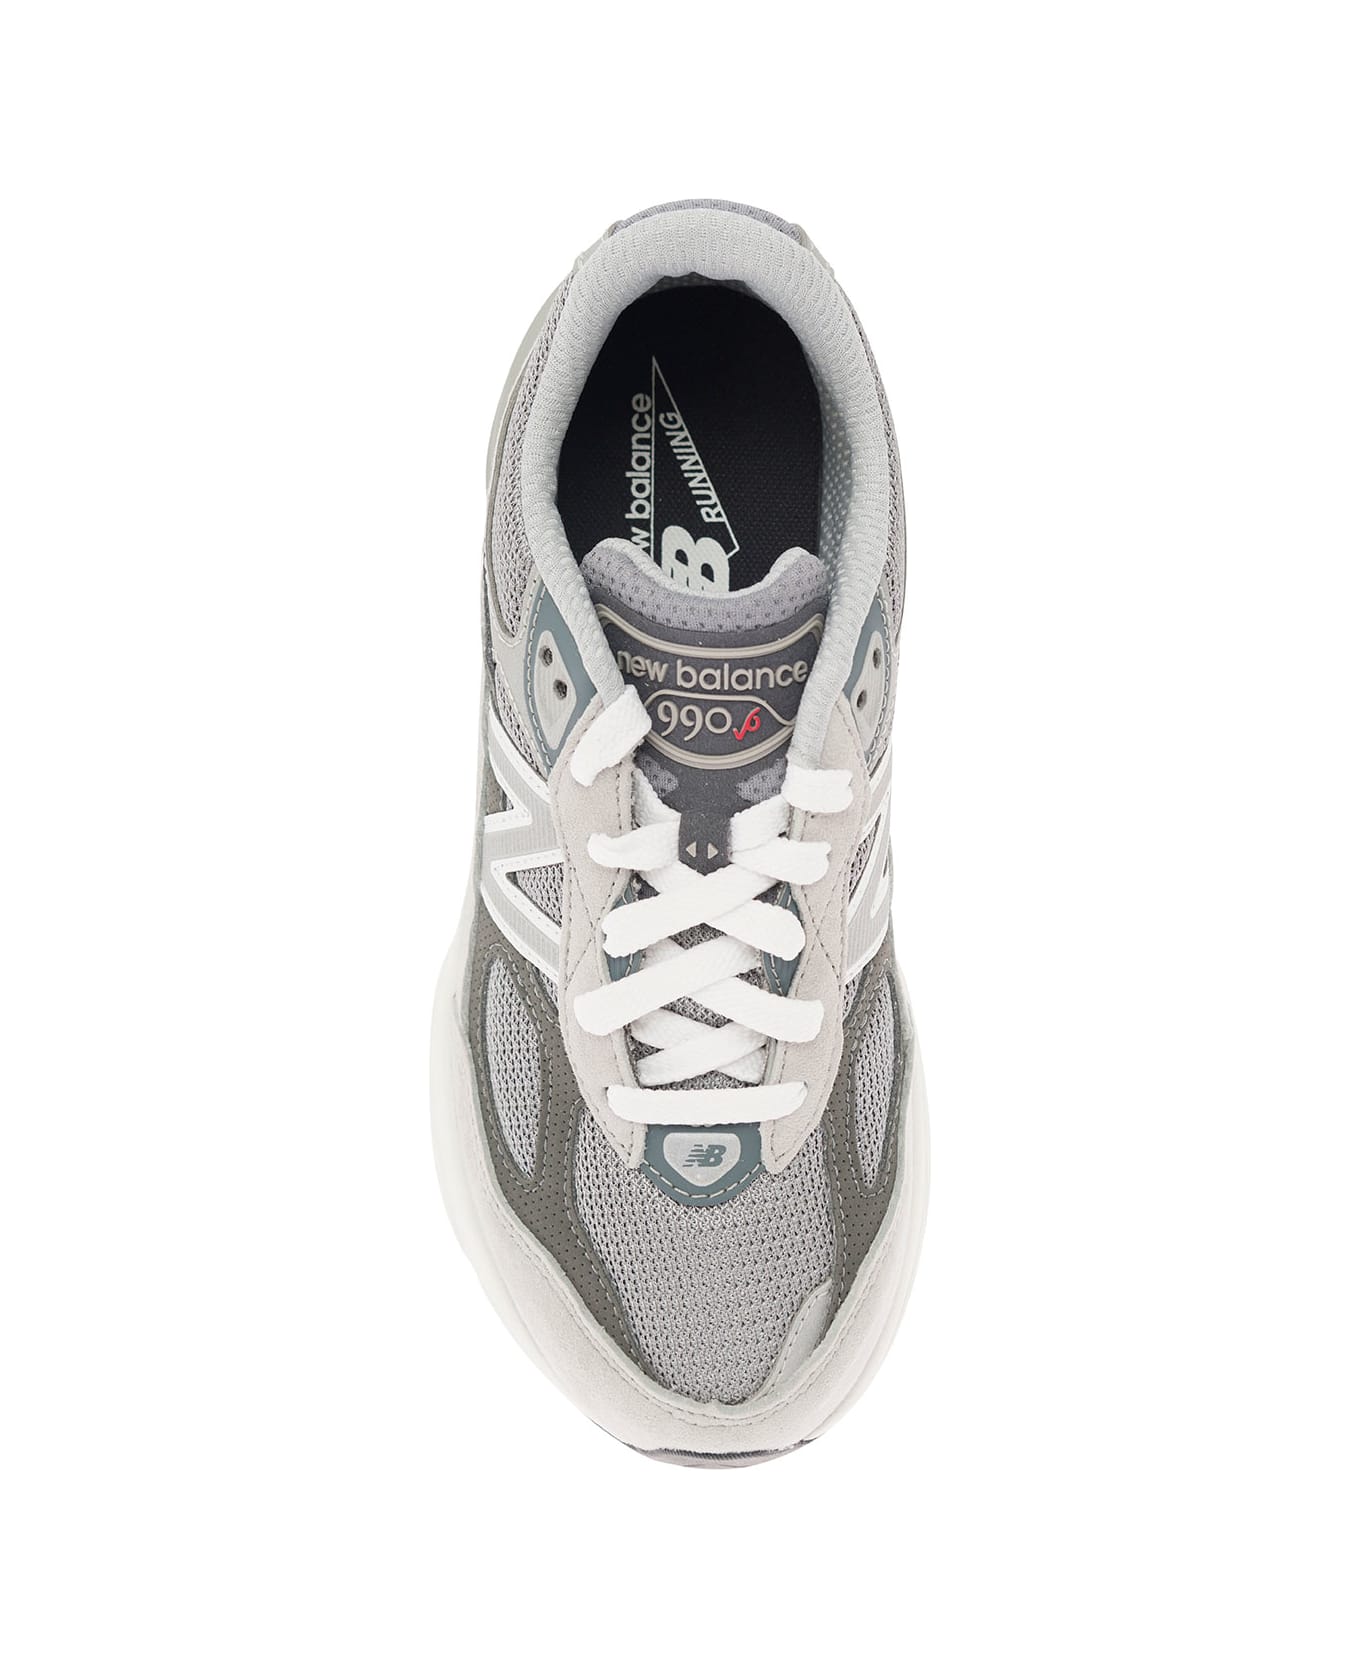 New Balance '990' Grey Low Top Sneakers With Logo Detail In Suede Boy - Grey